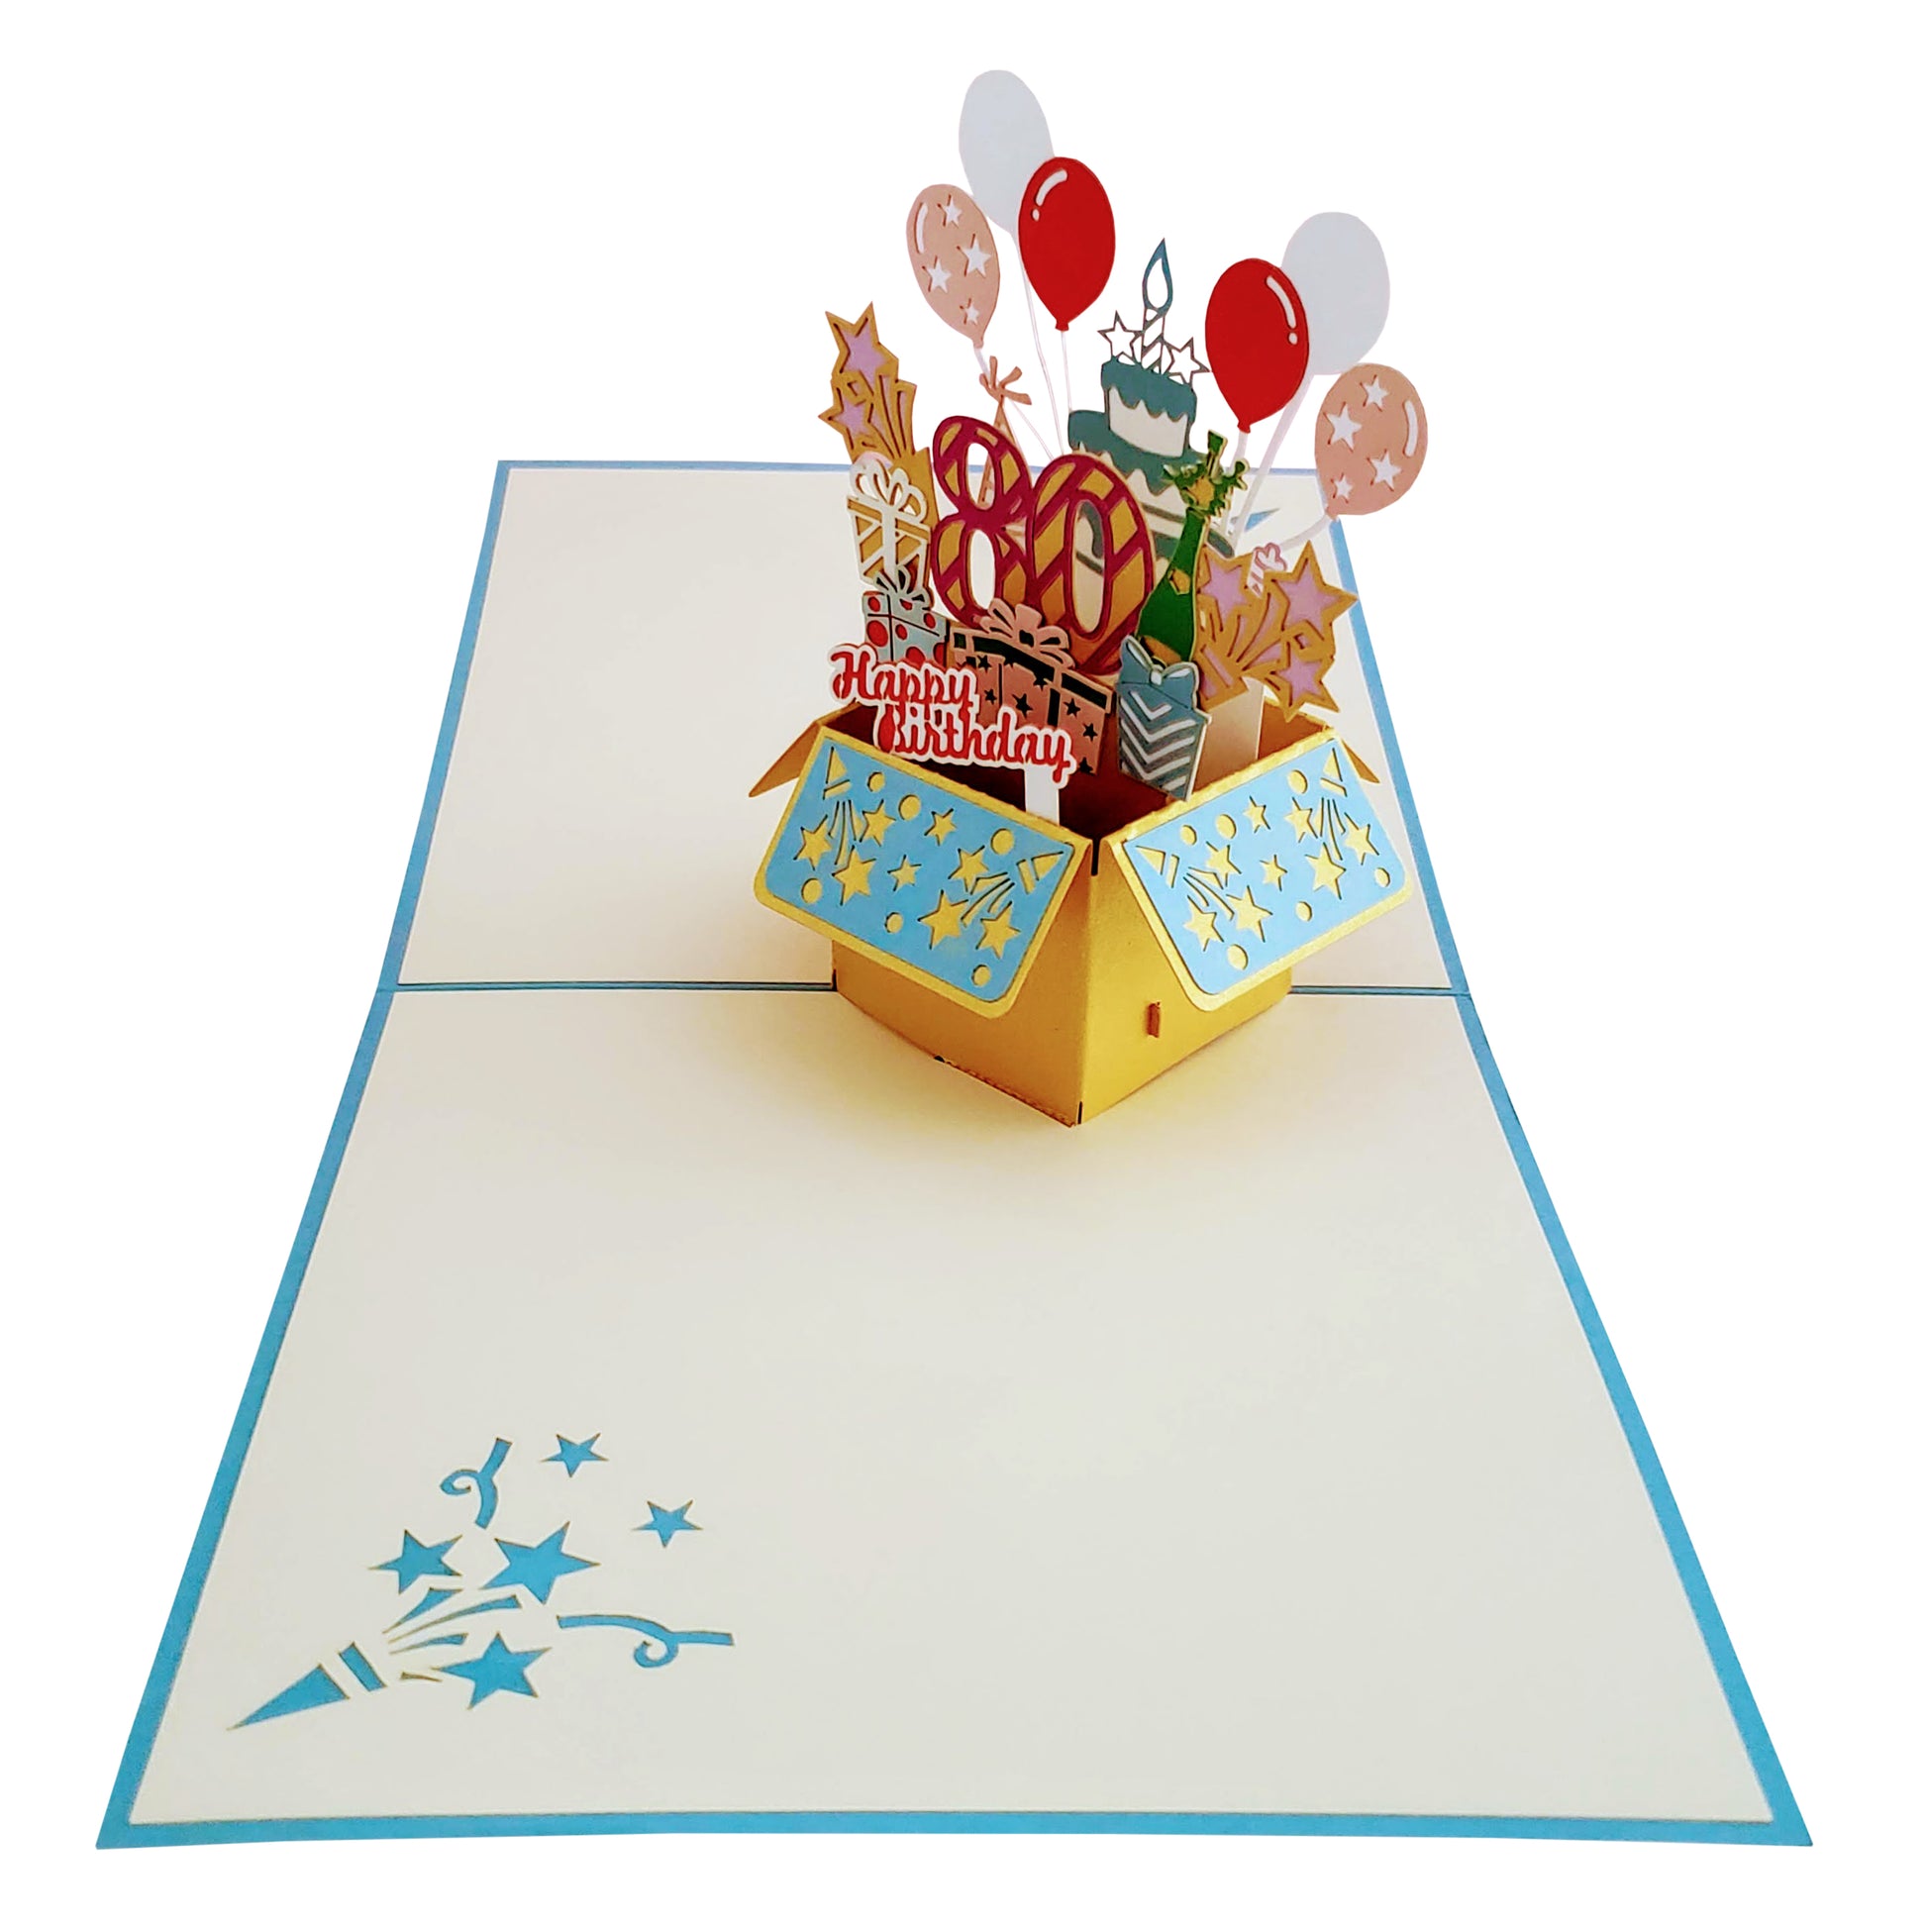 Happy 80th Blue Birthday Party Box 3D Pop Up Greeting Card - best wishes - Birthday - Celebration - iGifts And Cards